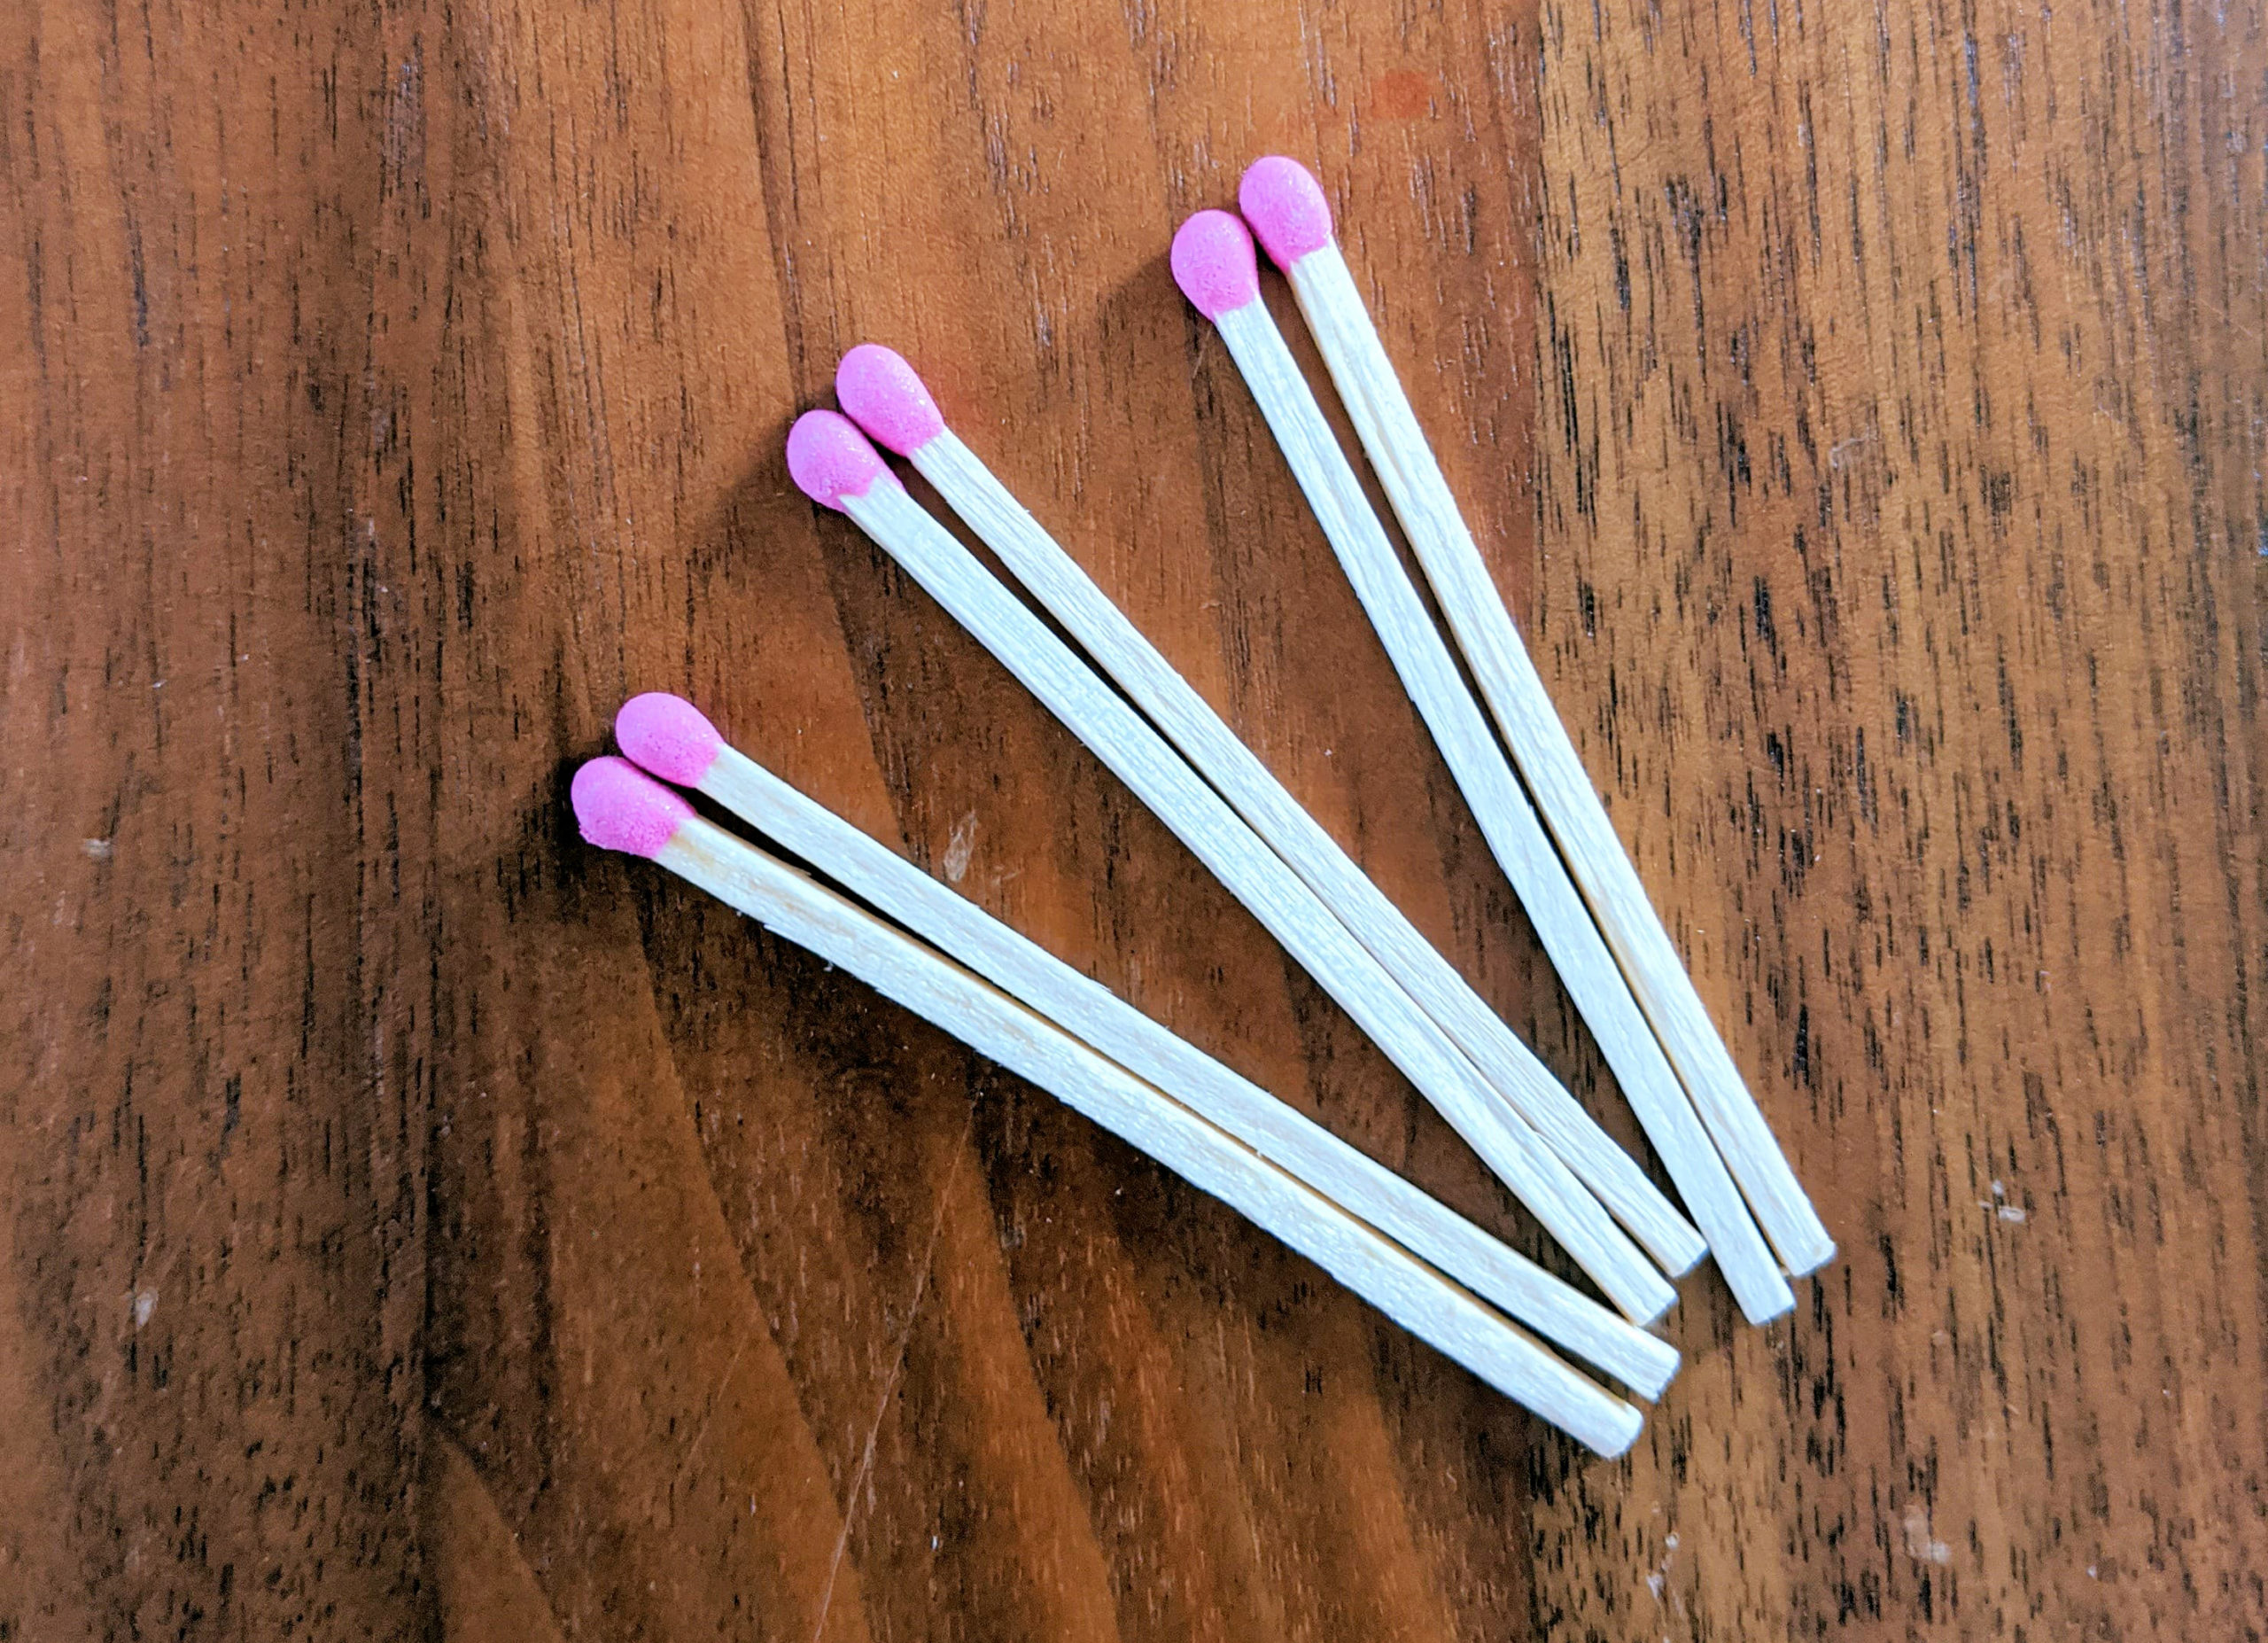 Matches are among the single-use items that can be composted. Photo: Celina Feng